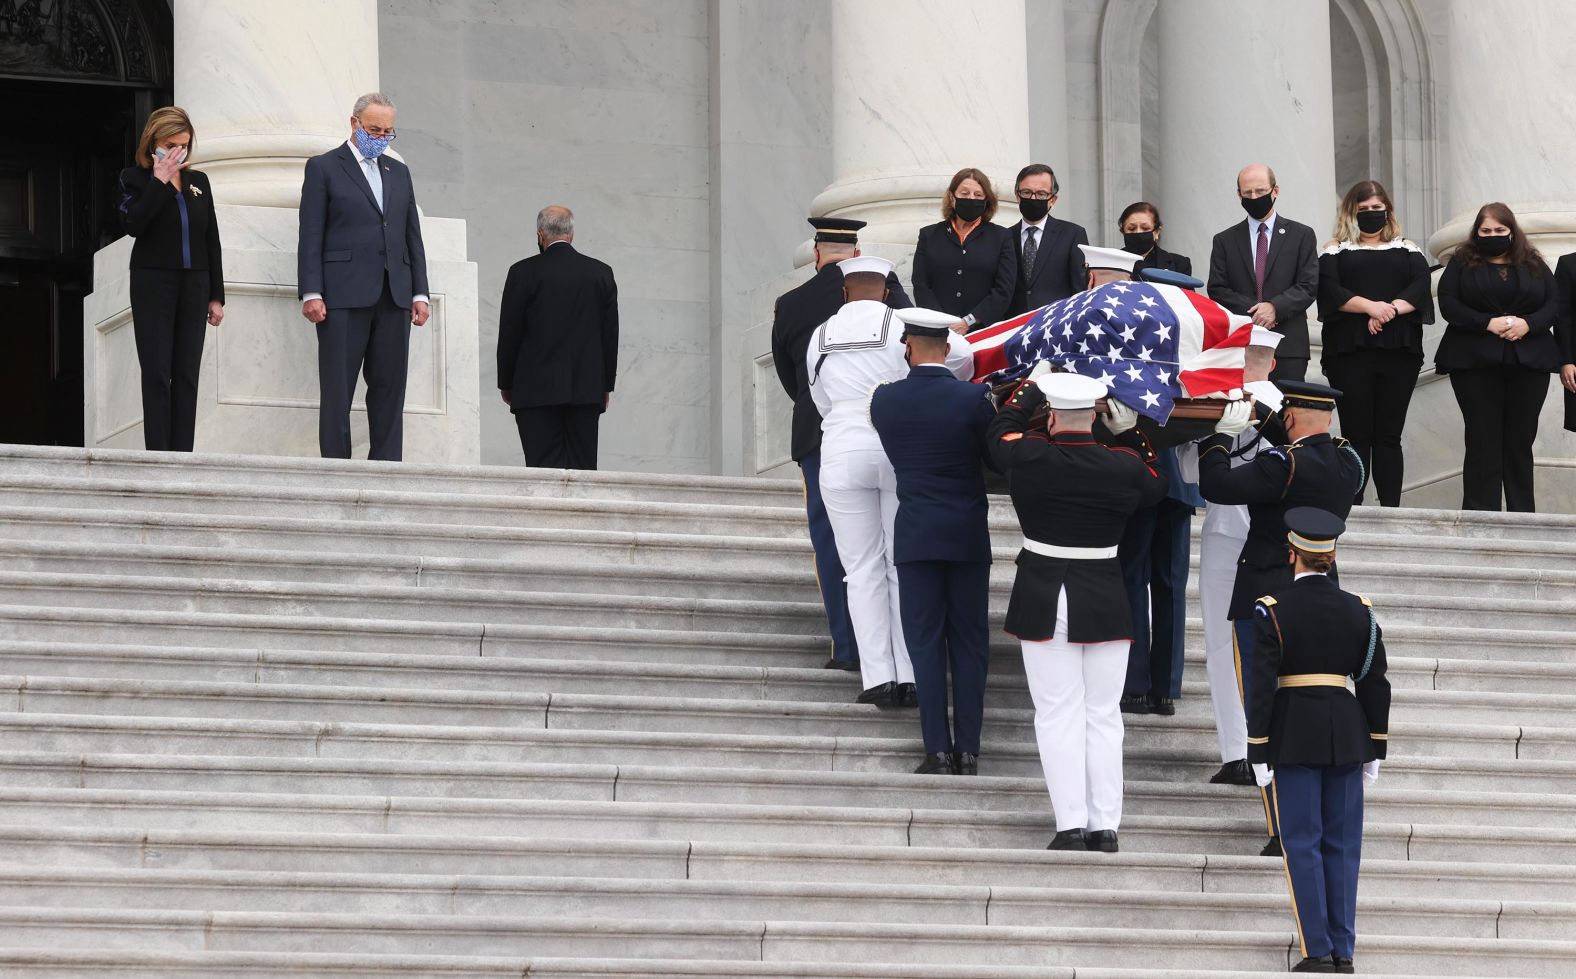 Ginsburg's casket is carried into the US Capitol on Friday.